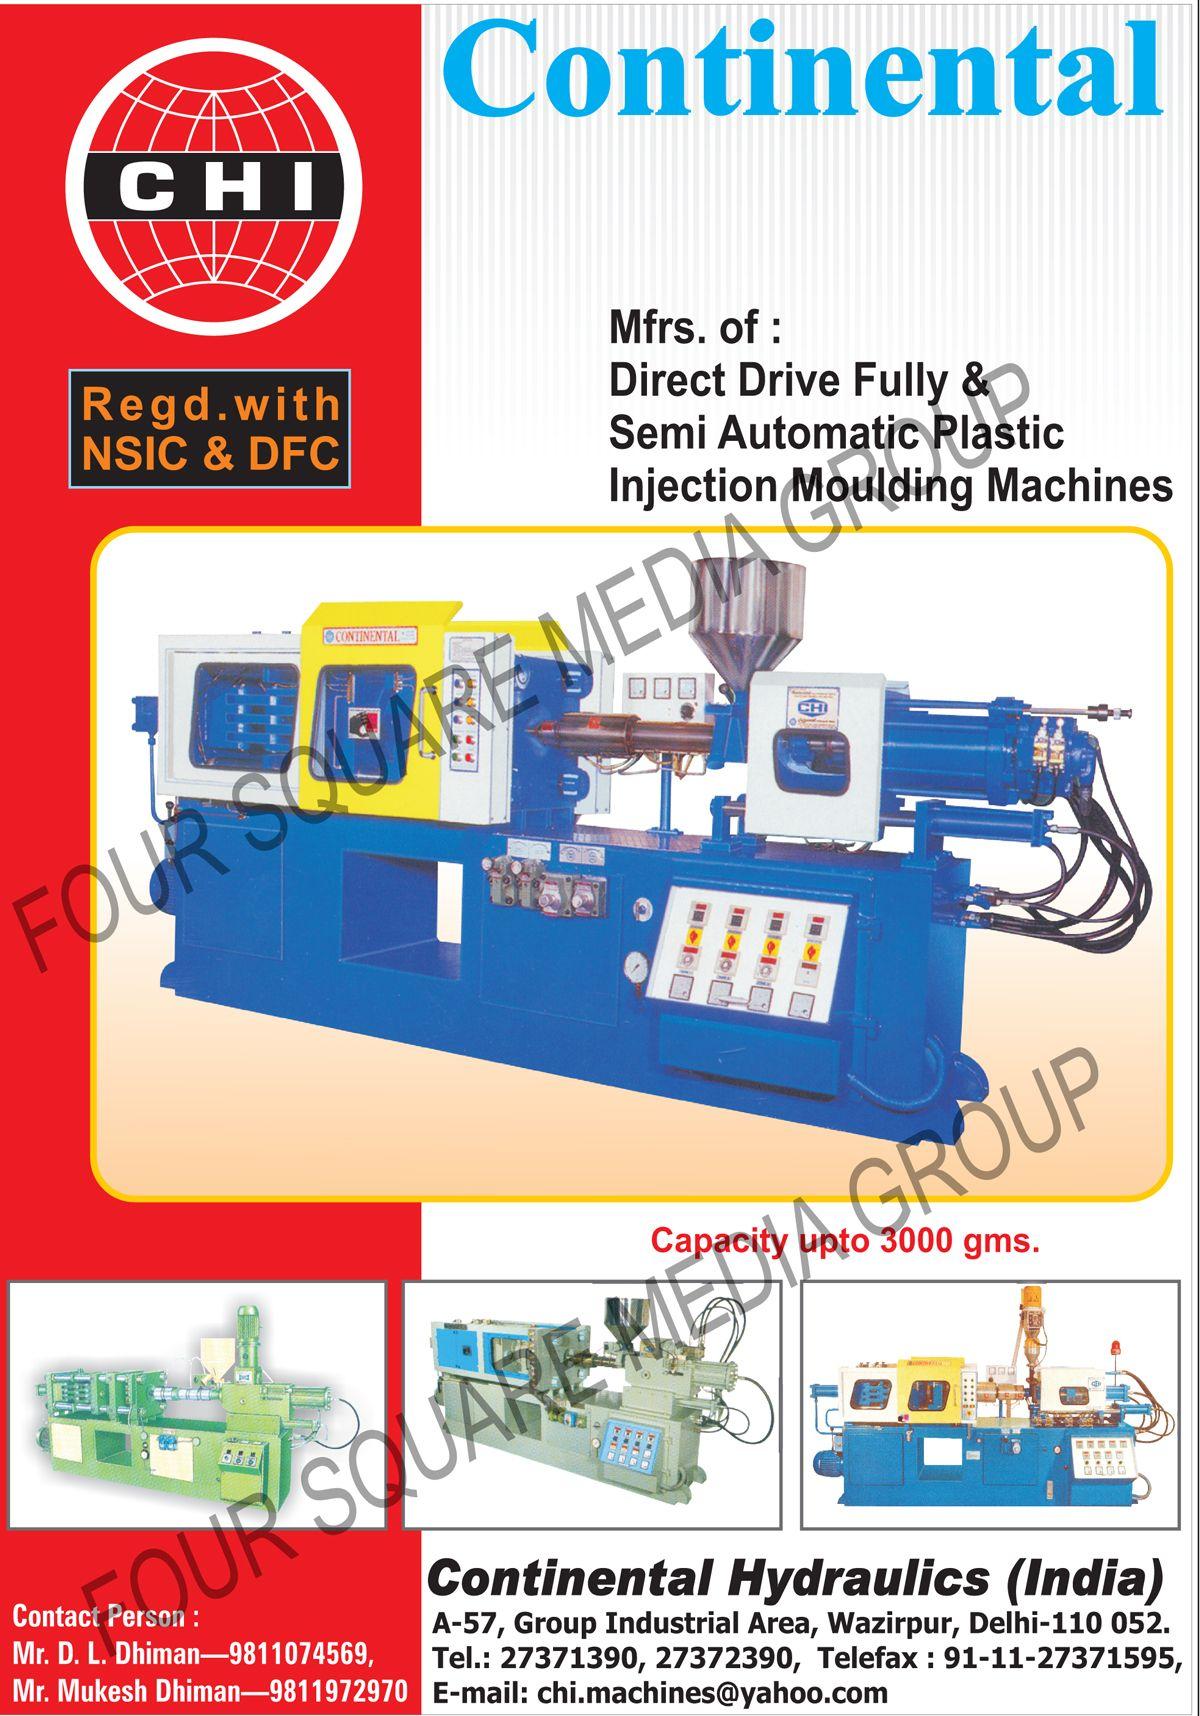 Continental Hydraulic Logo - Semi Automatic Plastic Injection Moulding Machines. Fully Automatic